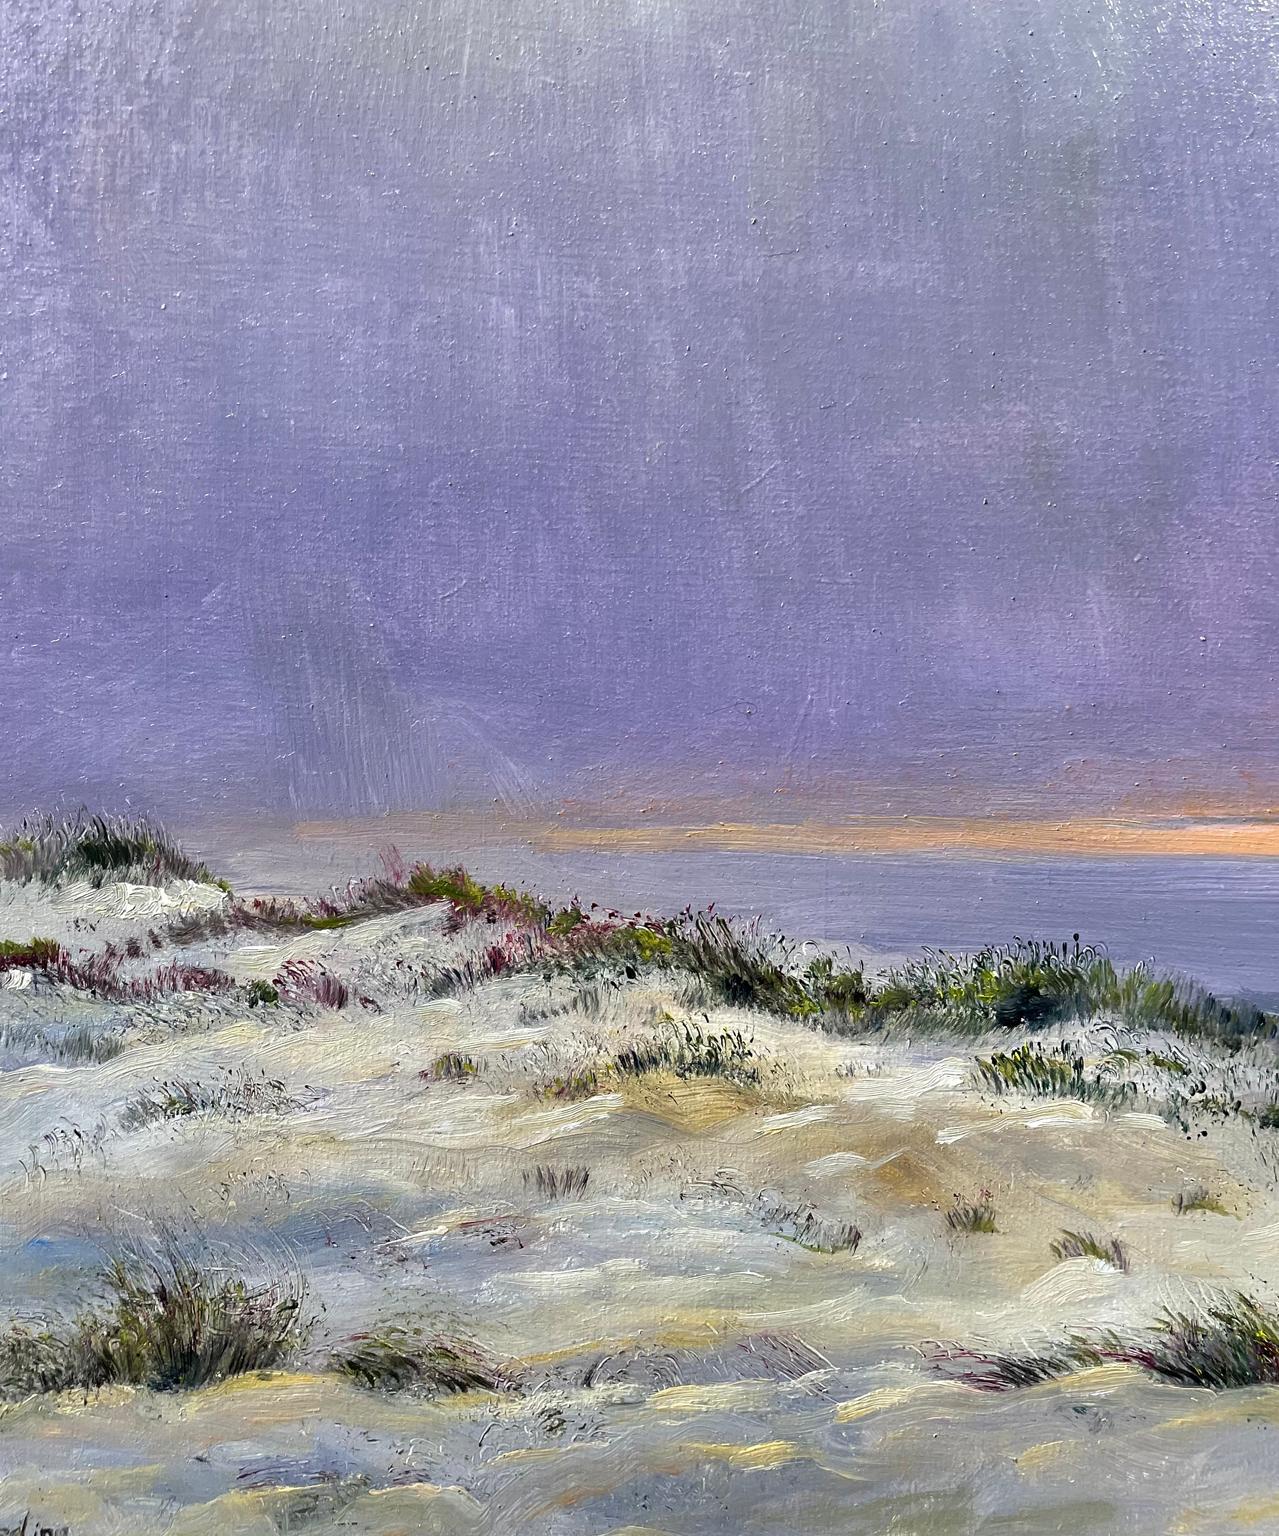 Quiet Day on the Gulf Coast of Florida - Painting by Nicholas Oberling